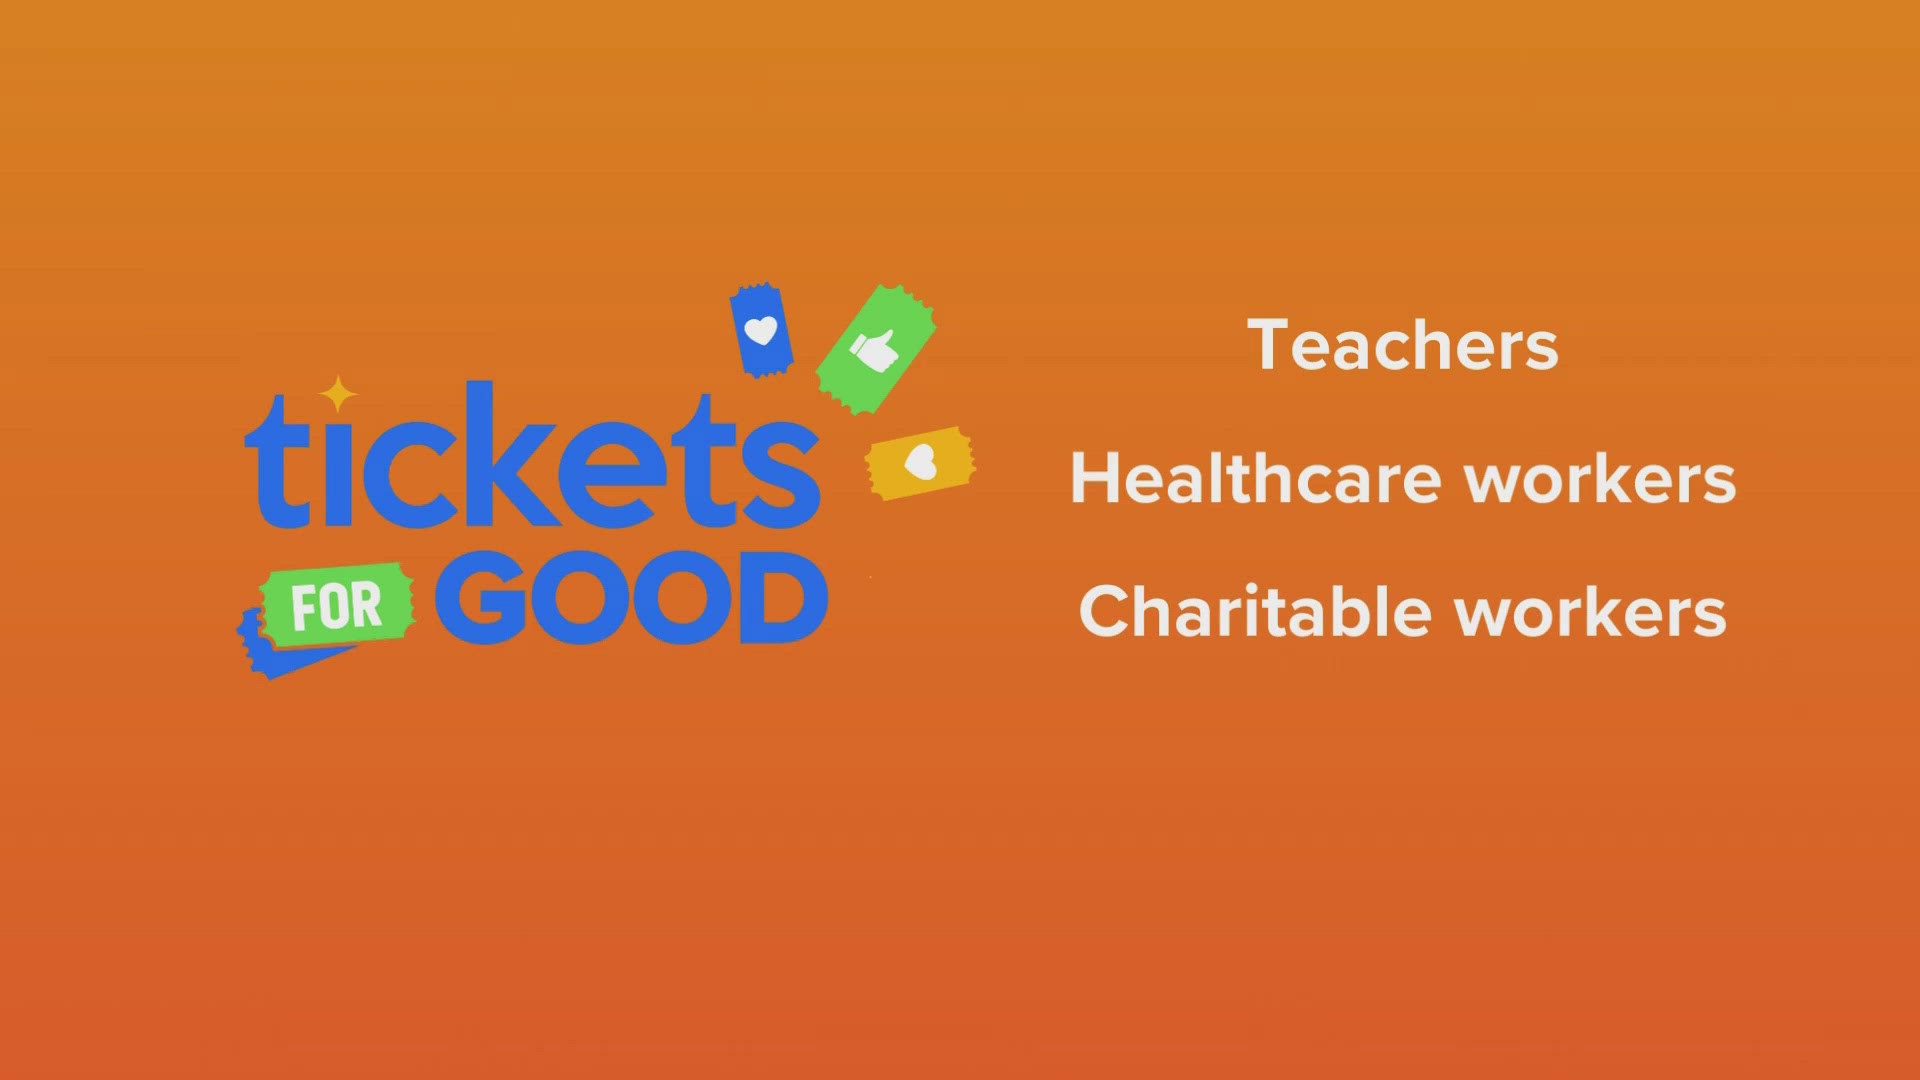 Tickets For Good is a ticketing and audience development platform enriching lives and fostering positive social impact.